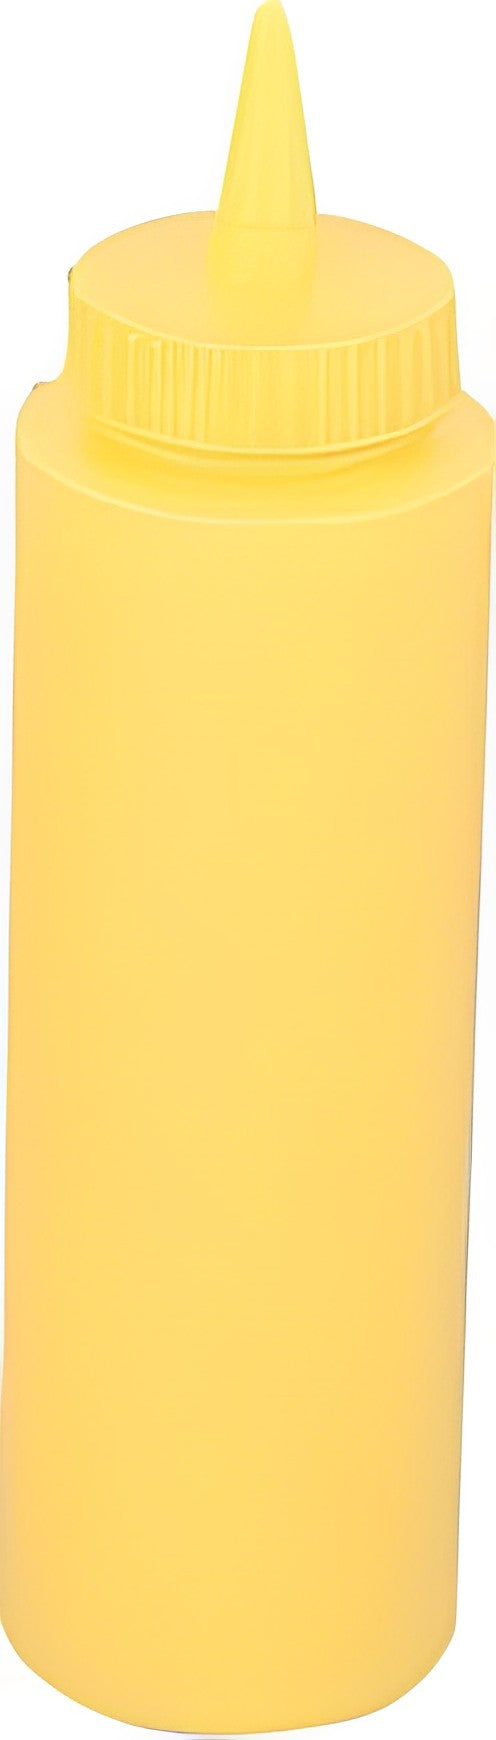 Browne - 8 Oz Yellow Squeeze Bottles Set of 12 - 1101